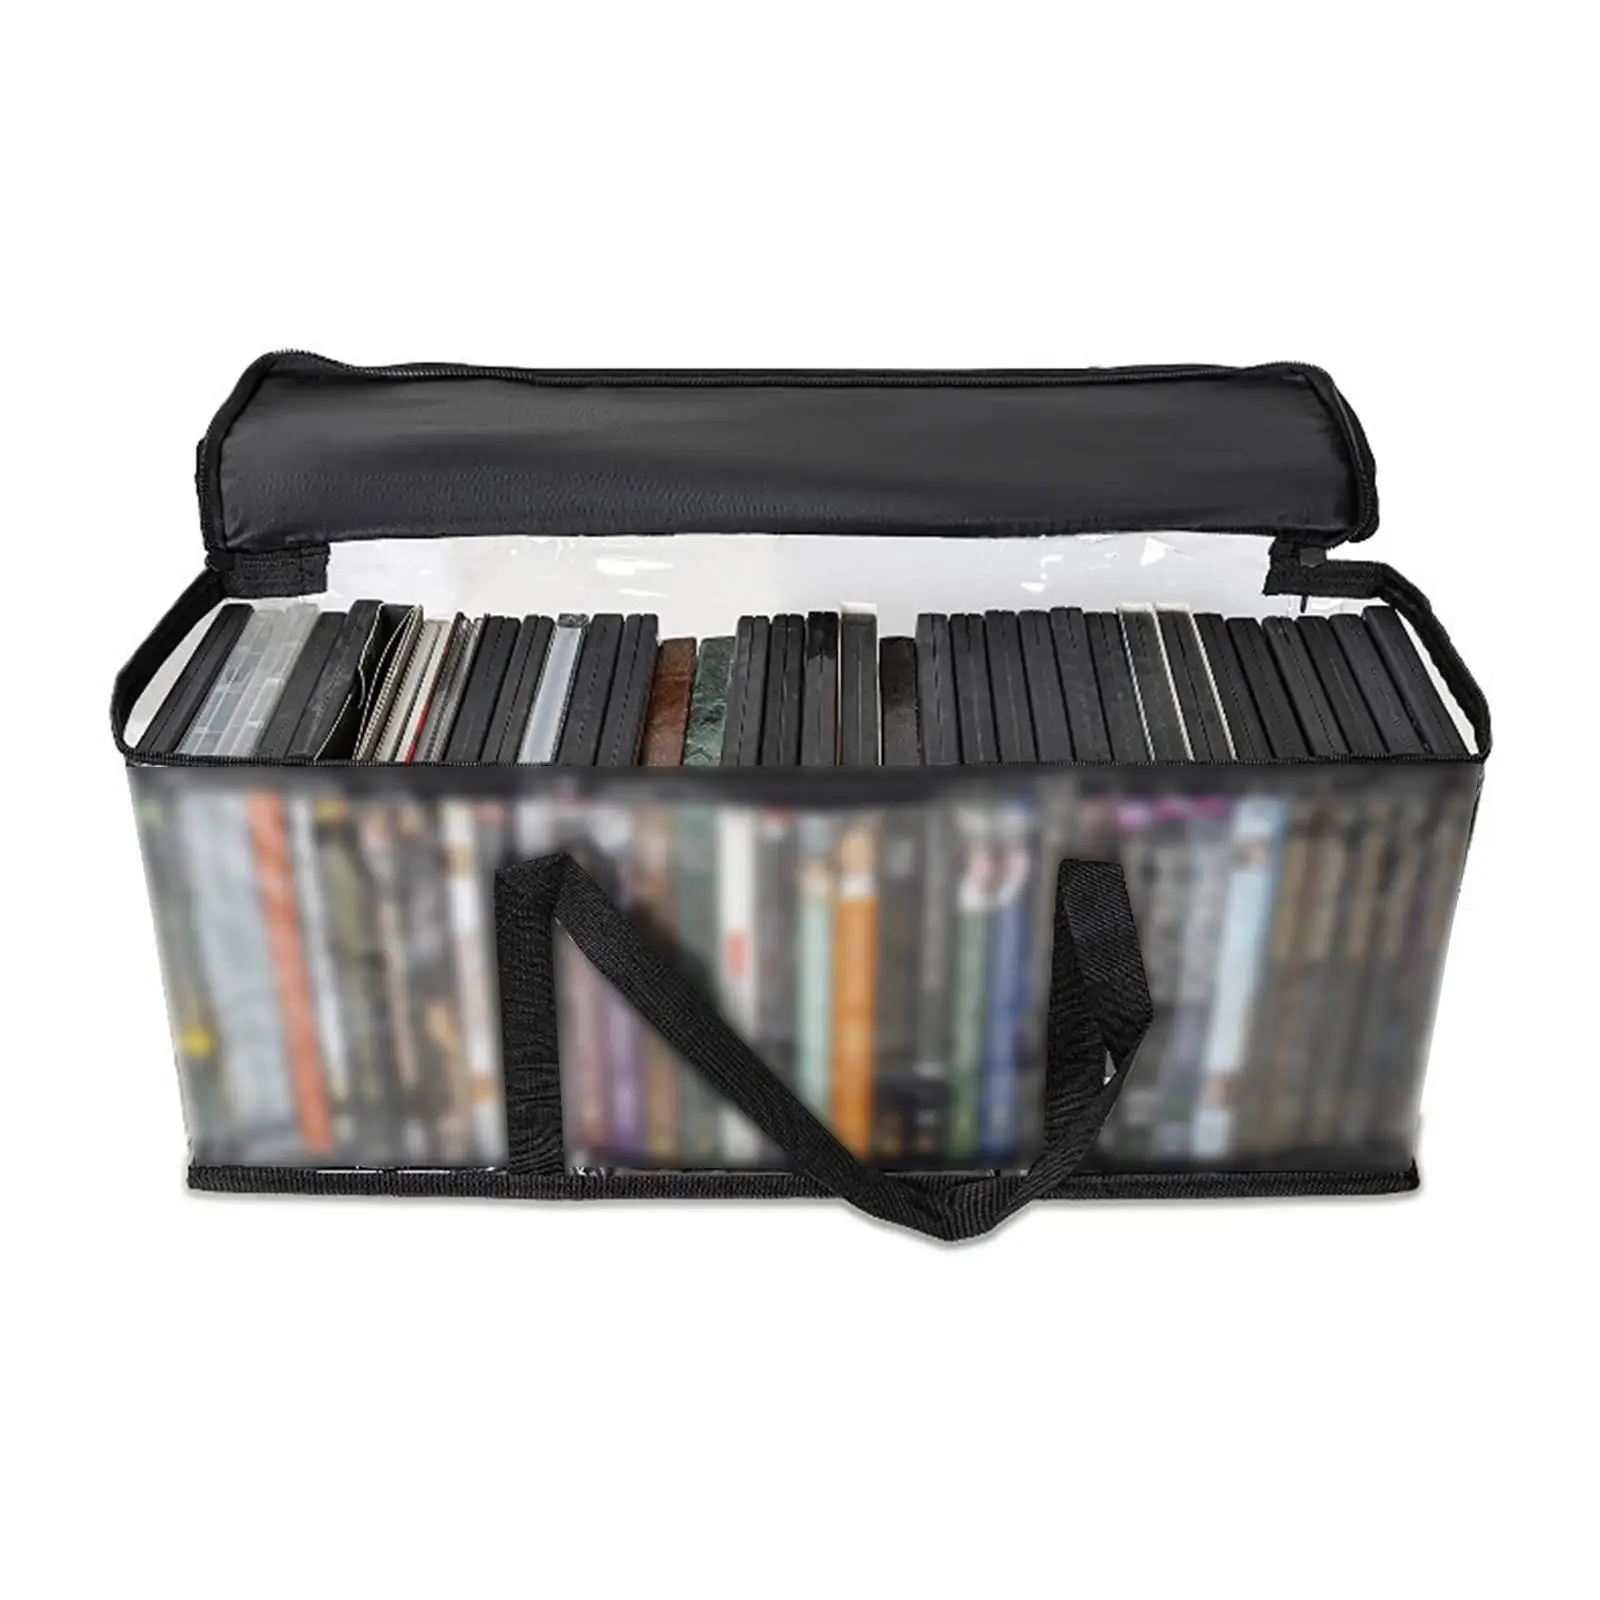 DVD Storage Bag Clear Organizer with Handles Zipper Holder Portable Display for Book Shelf Office